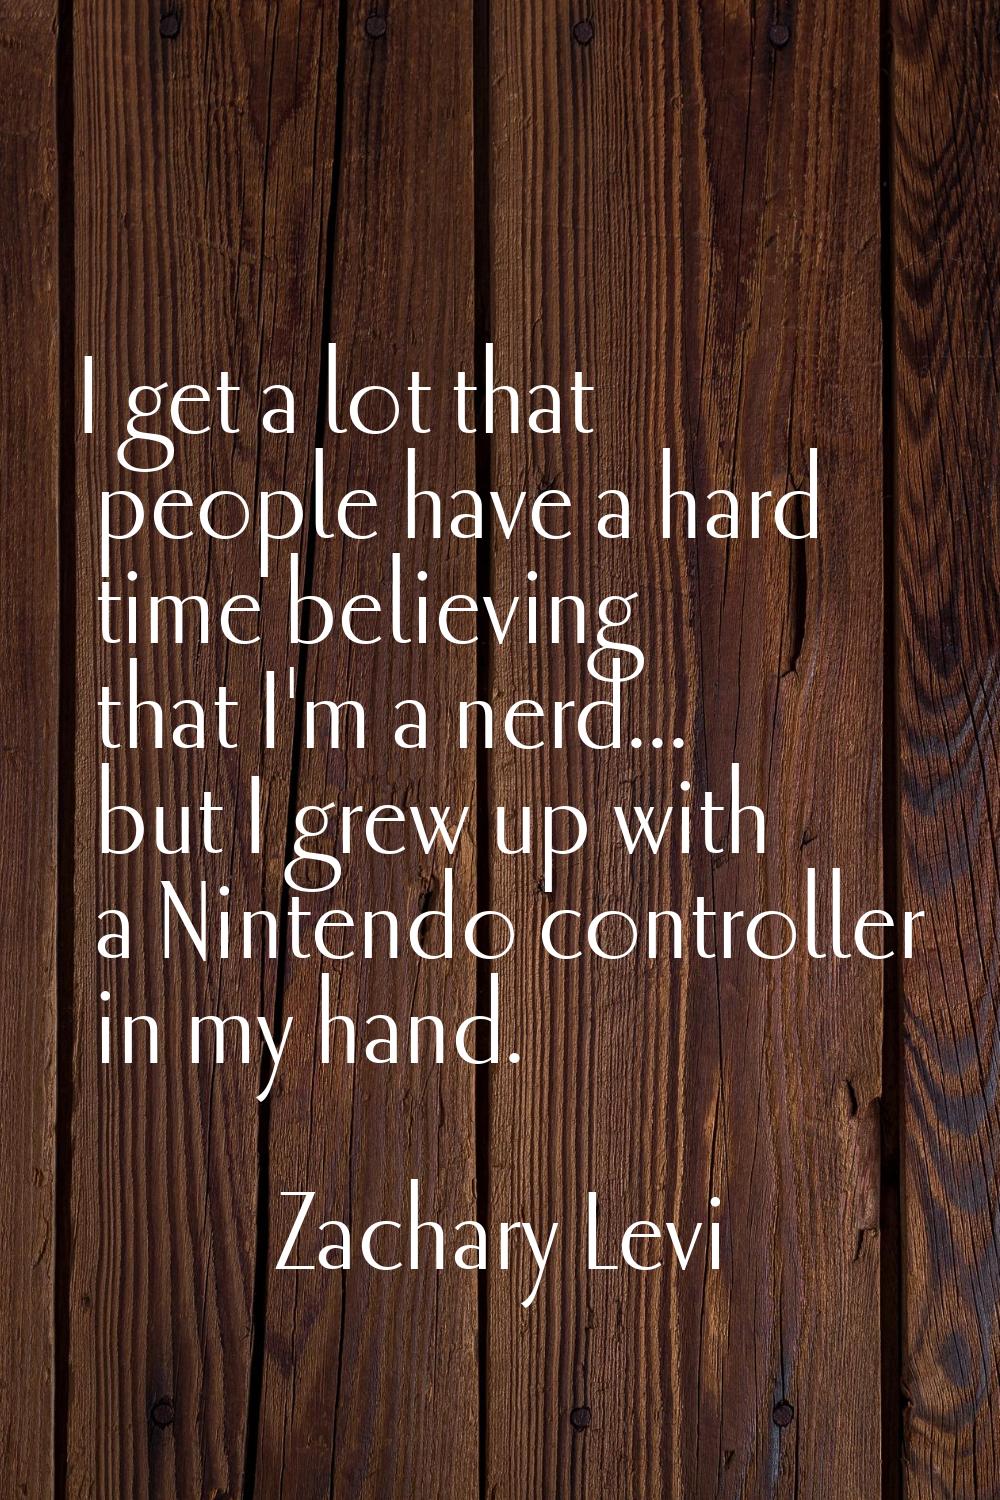 I get a lot that people have a hard time believing that I'm a nerd... but I grew up with a Nintendo